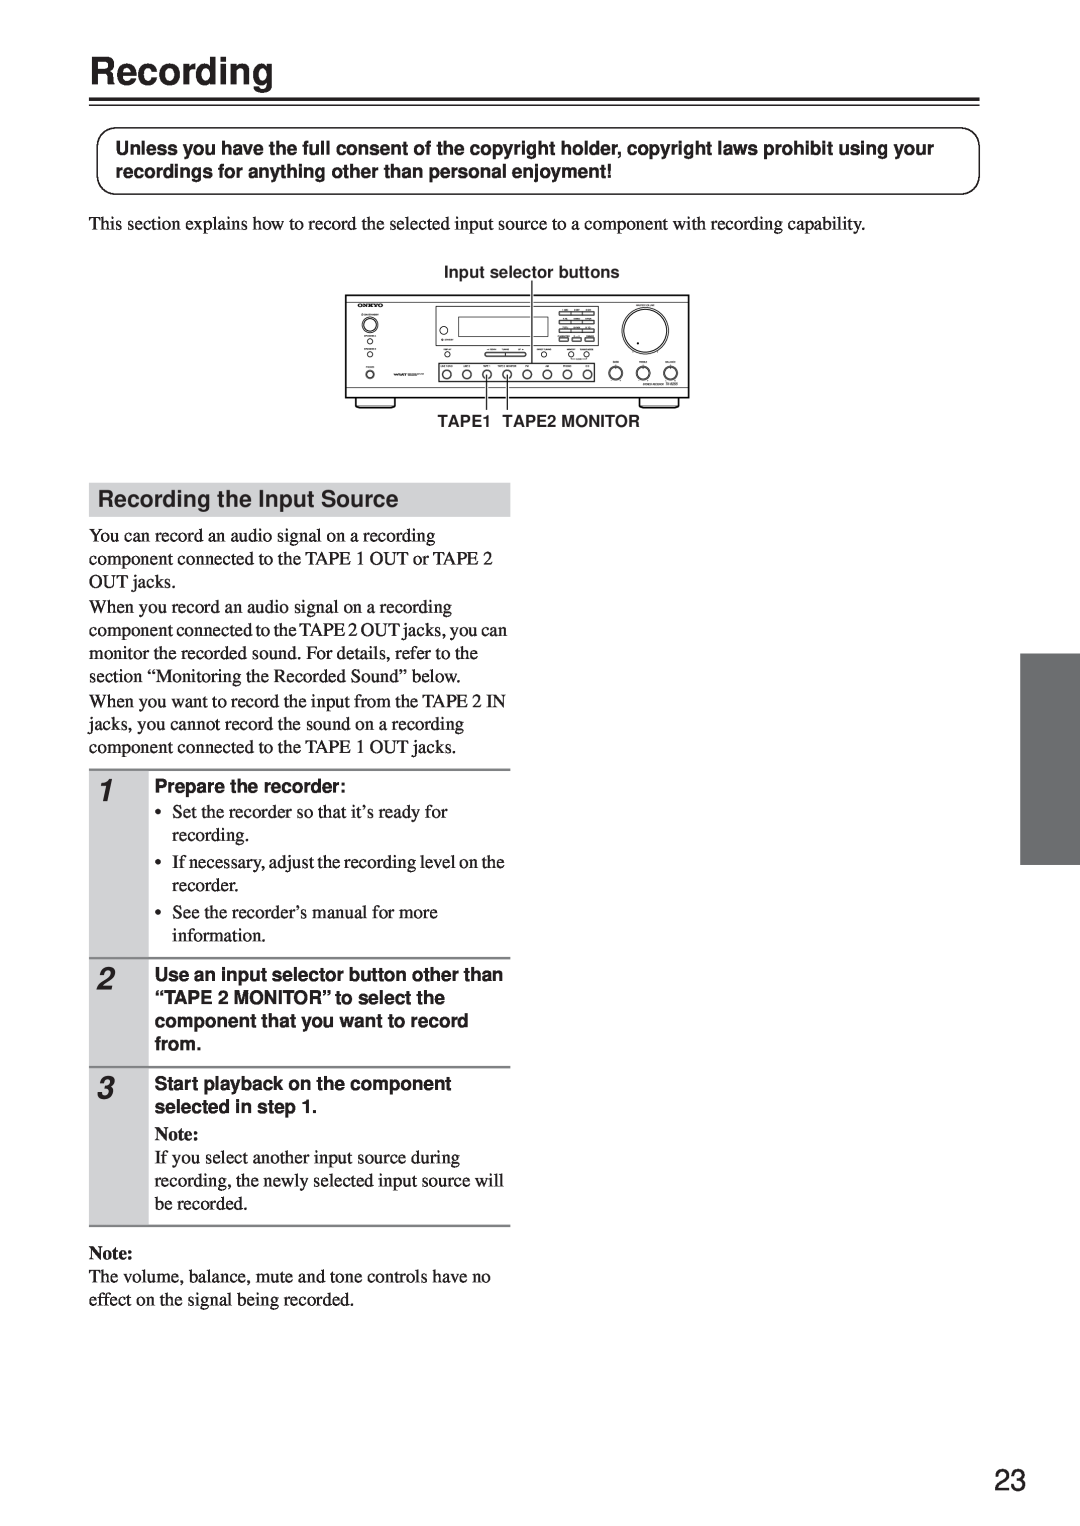 Onkyo TX-8255 instruction manual Recording the Input Source 